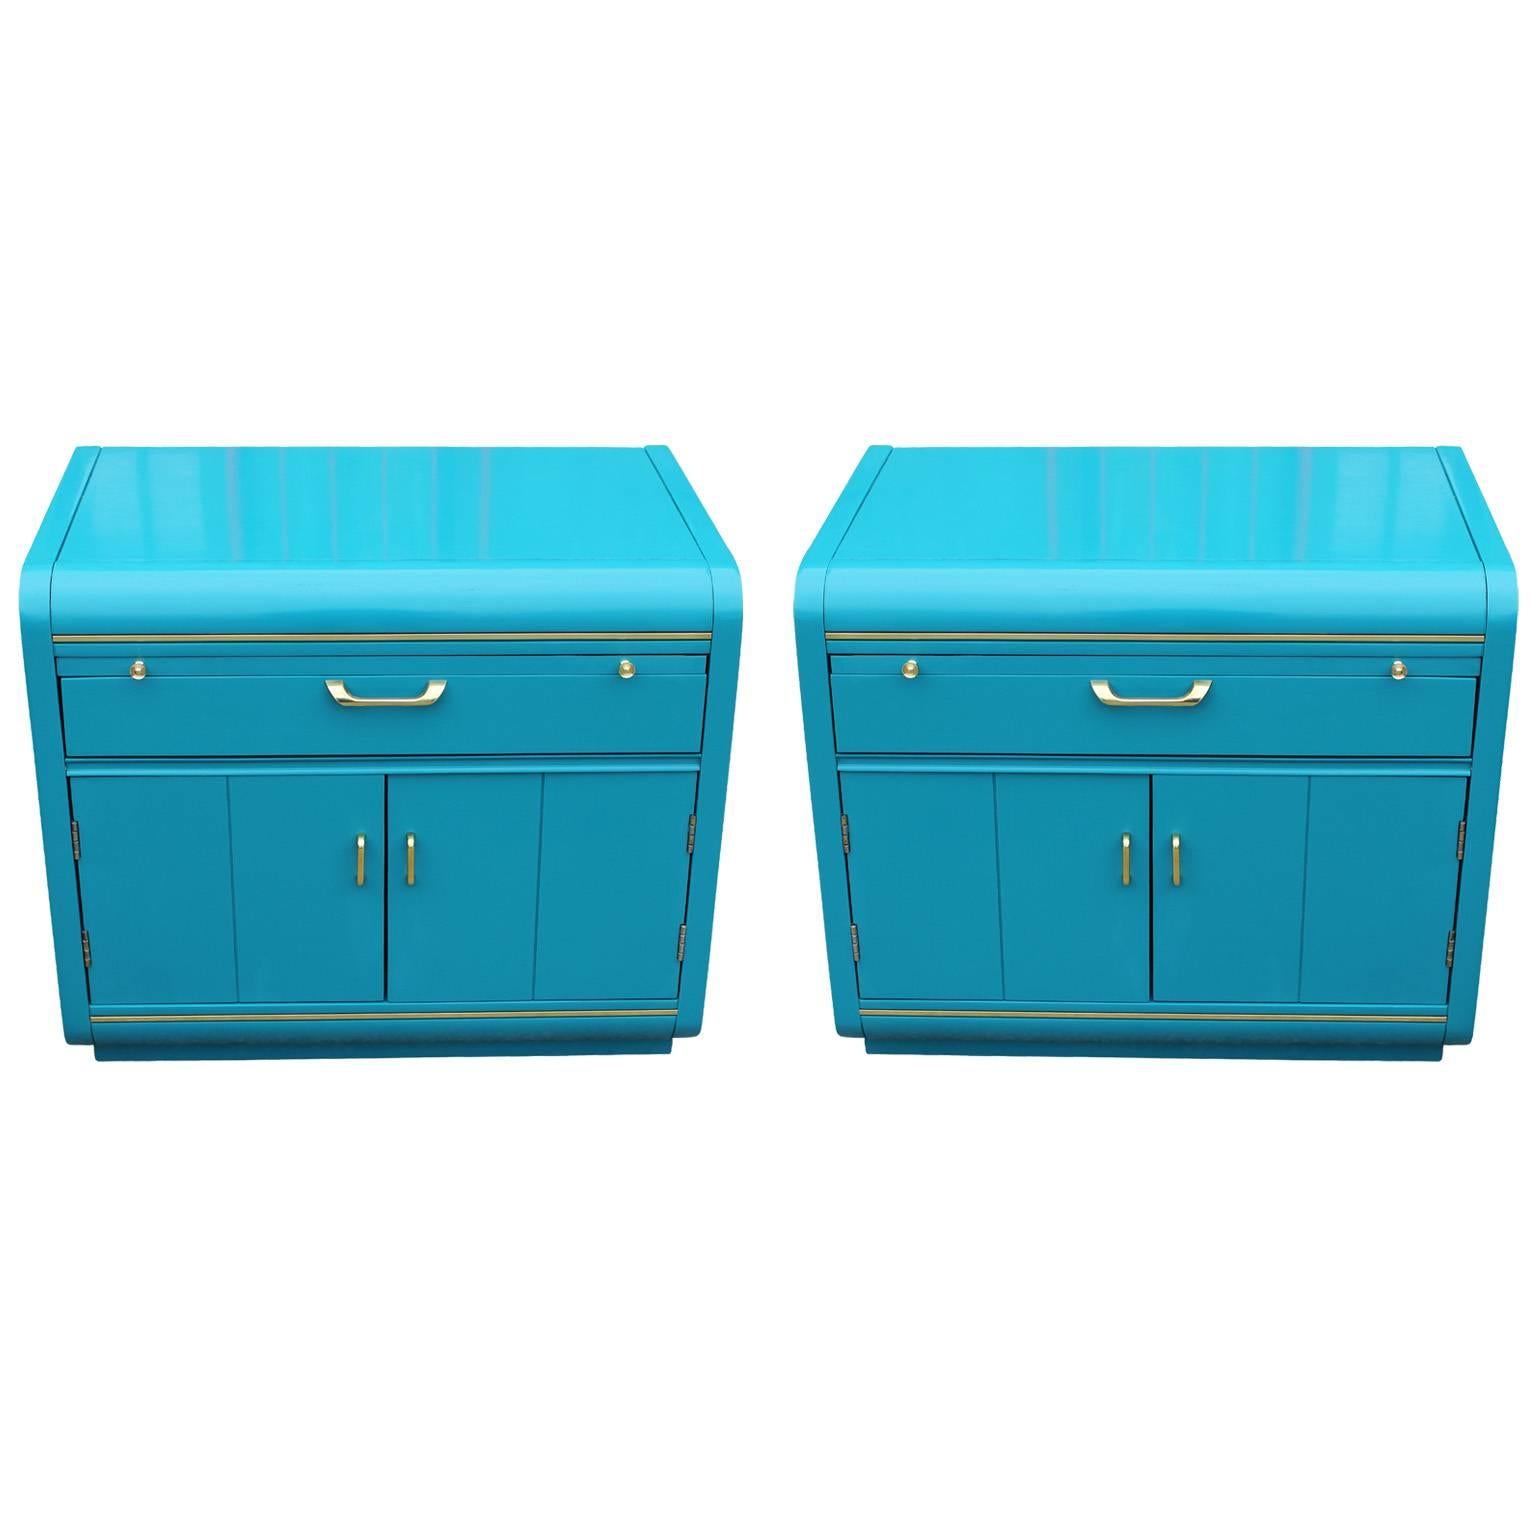 Pair of Modern Turquoise Lacquer and Brass Hardware Night Stands